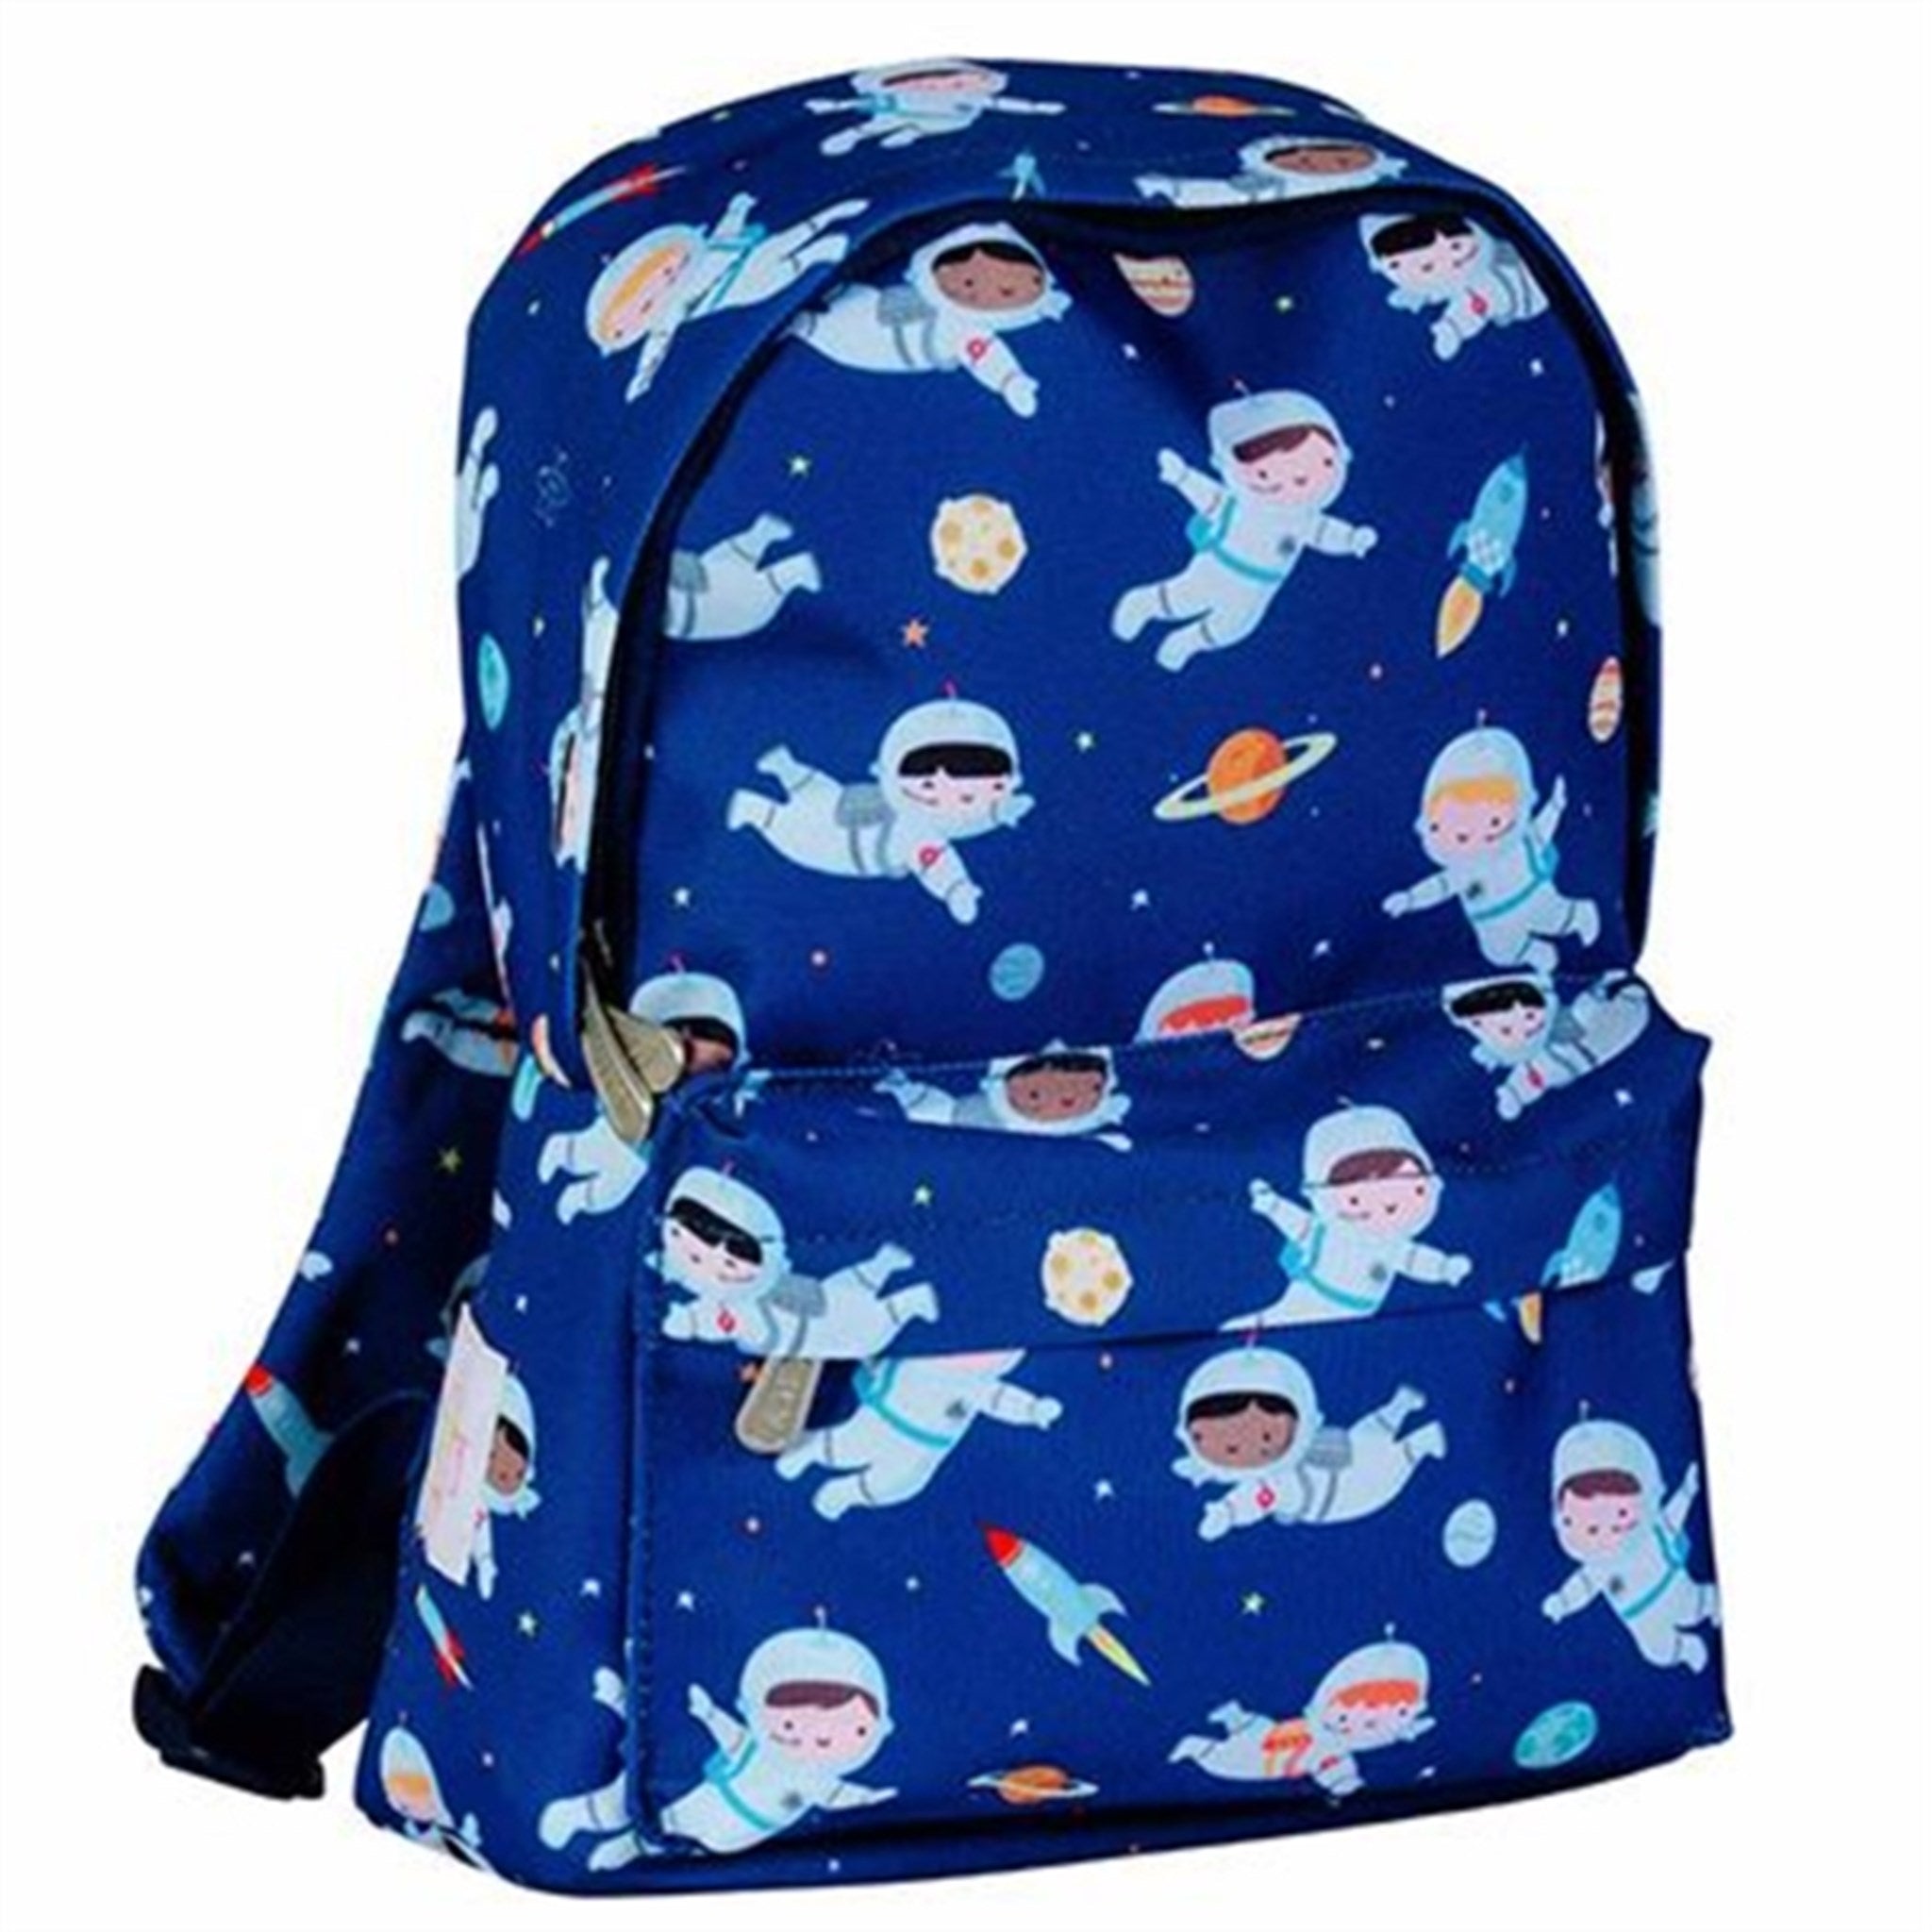 A Little Lovely Company Backpack Small Astronauts 6